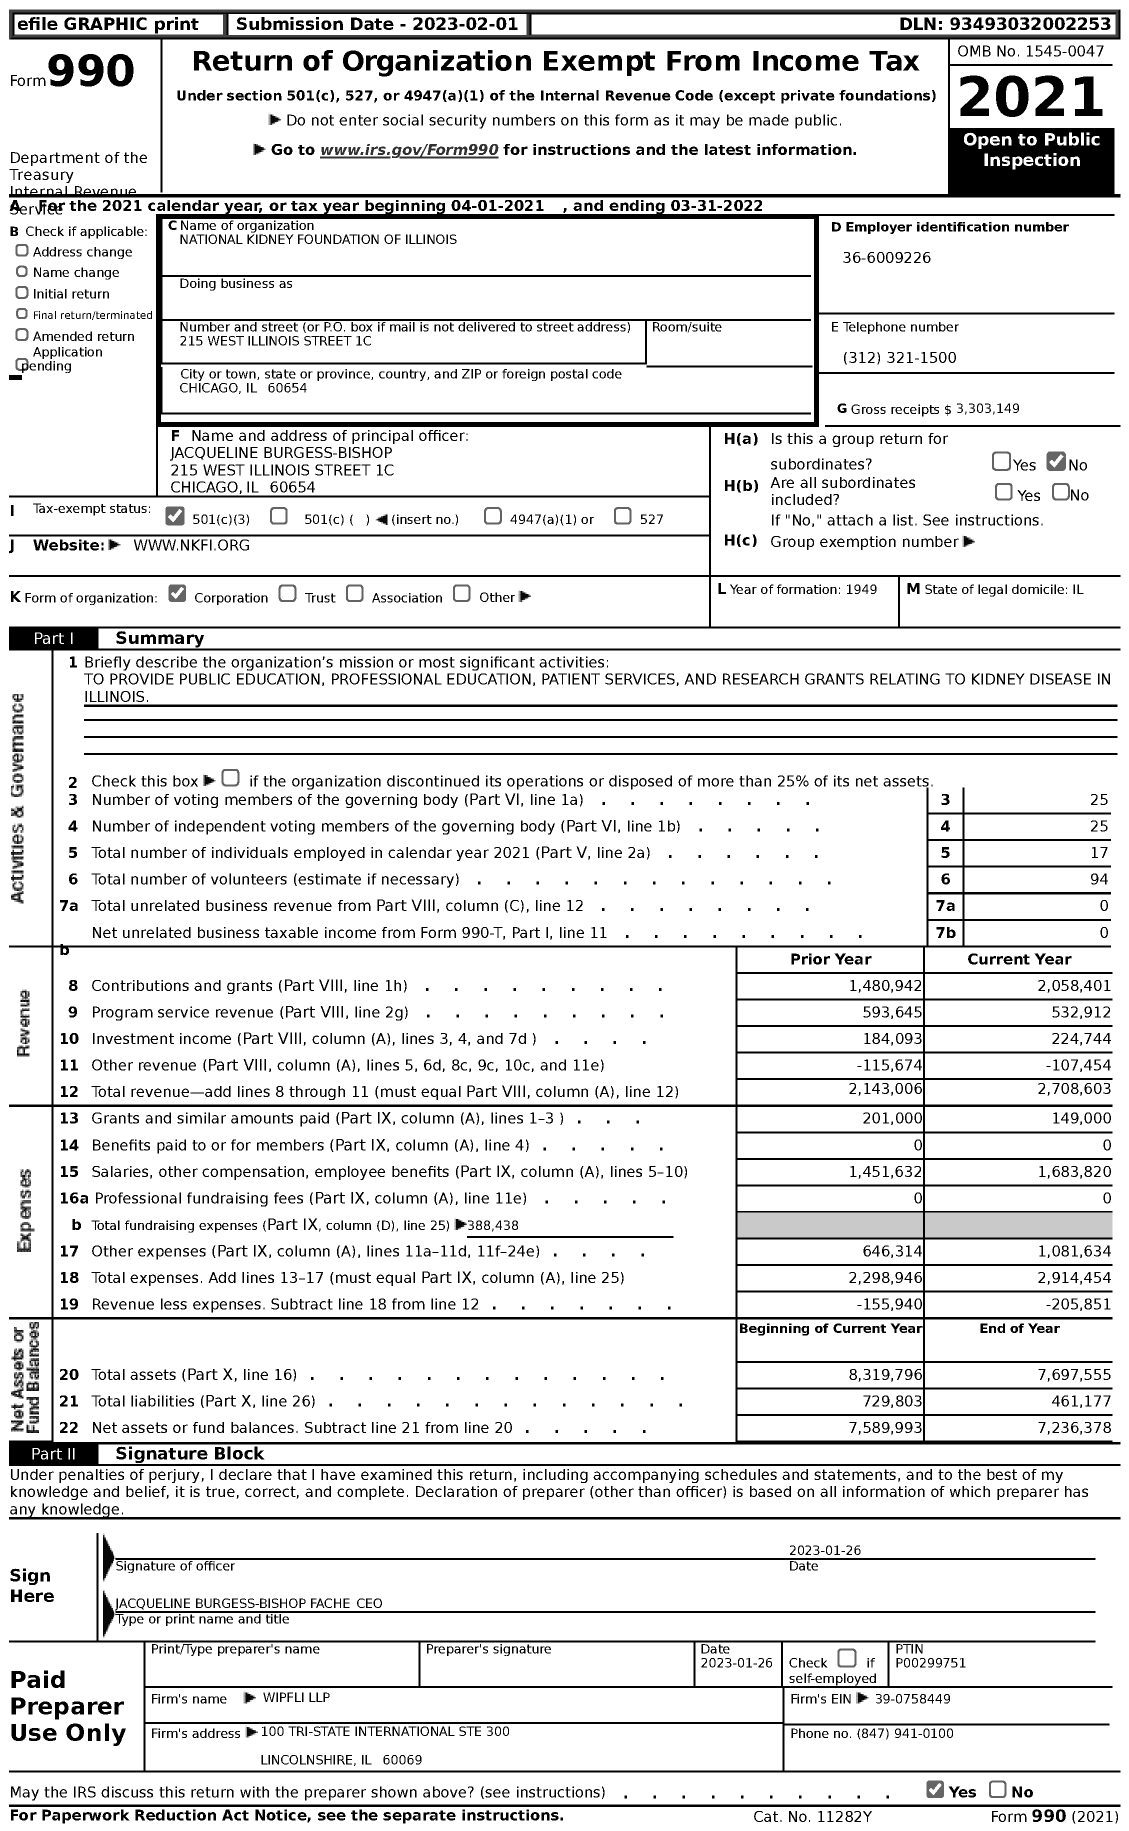 Image of first page of 2021 Form 990 for National Kidney Foundation of Illinois (NKF)